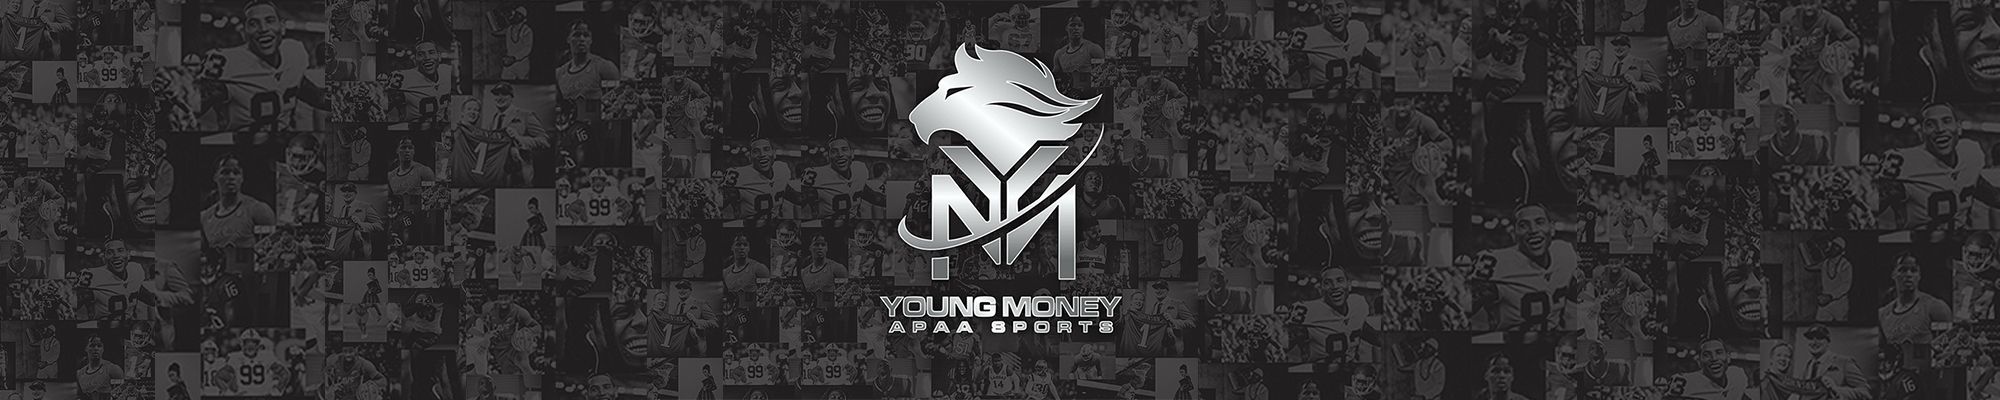 Young Money APAA